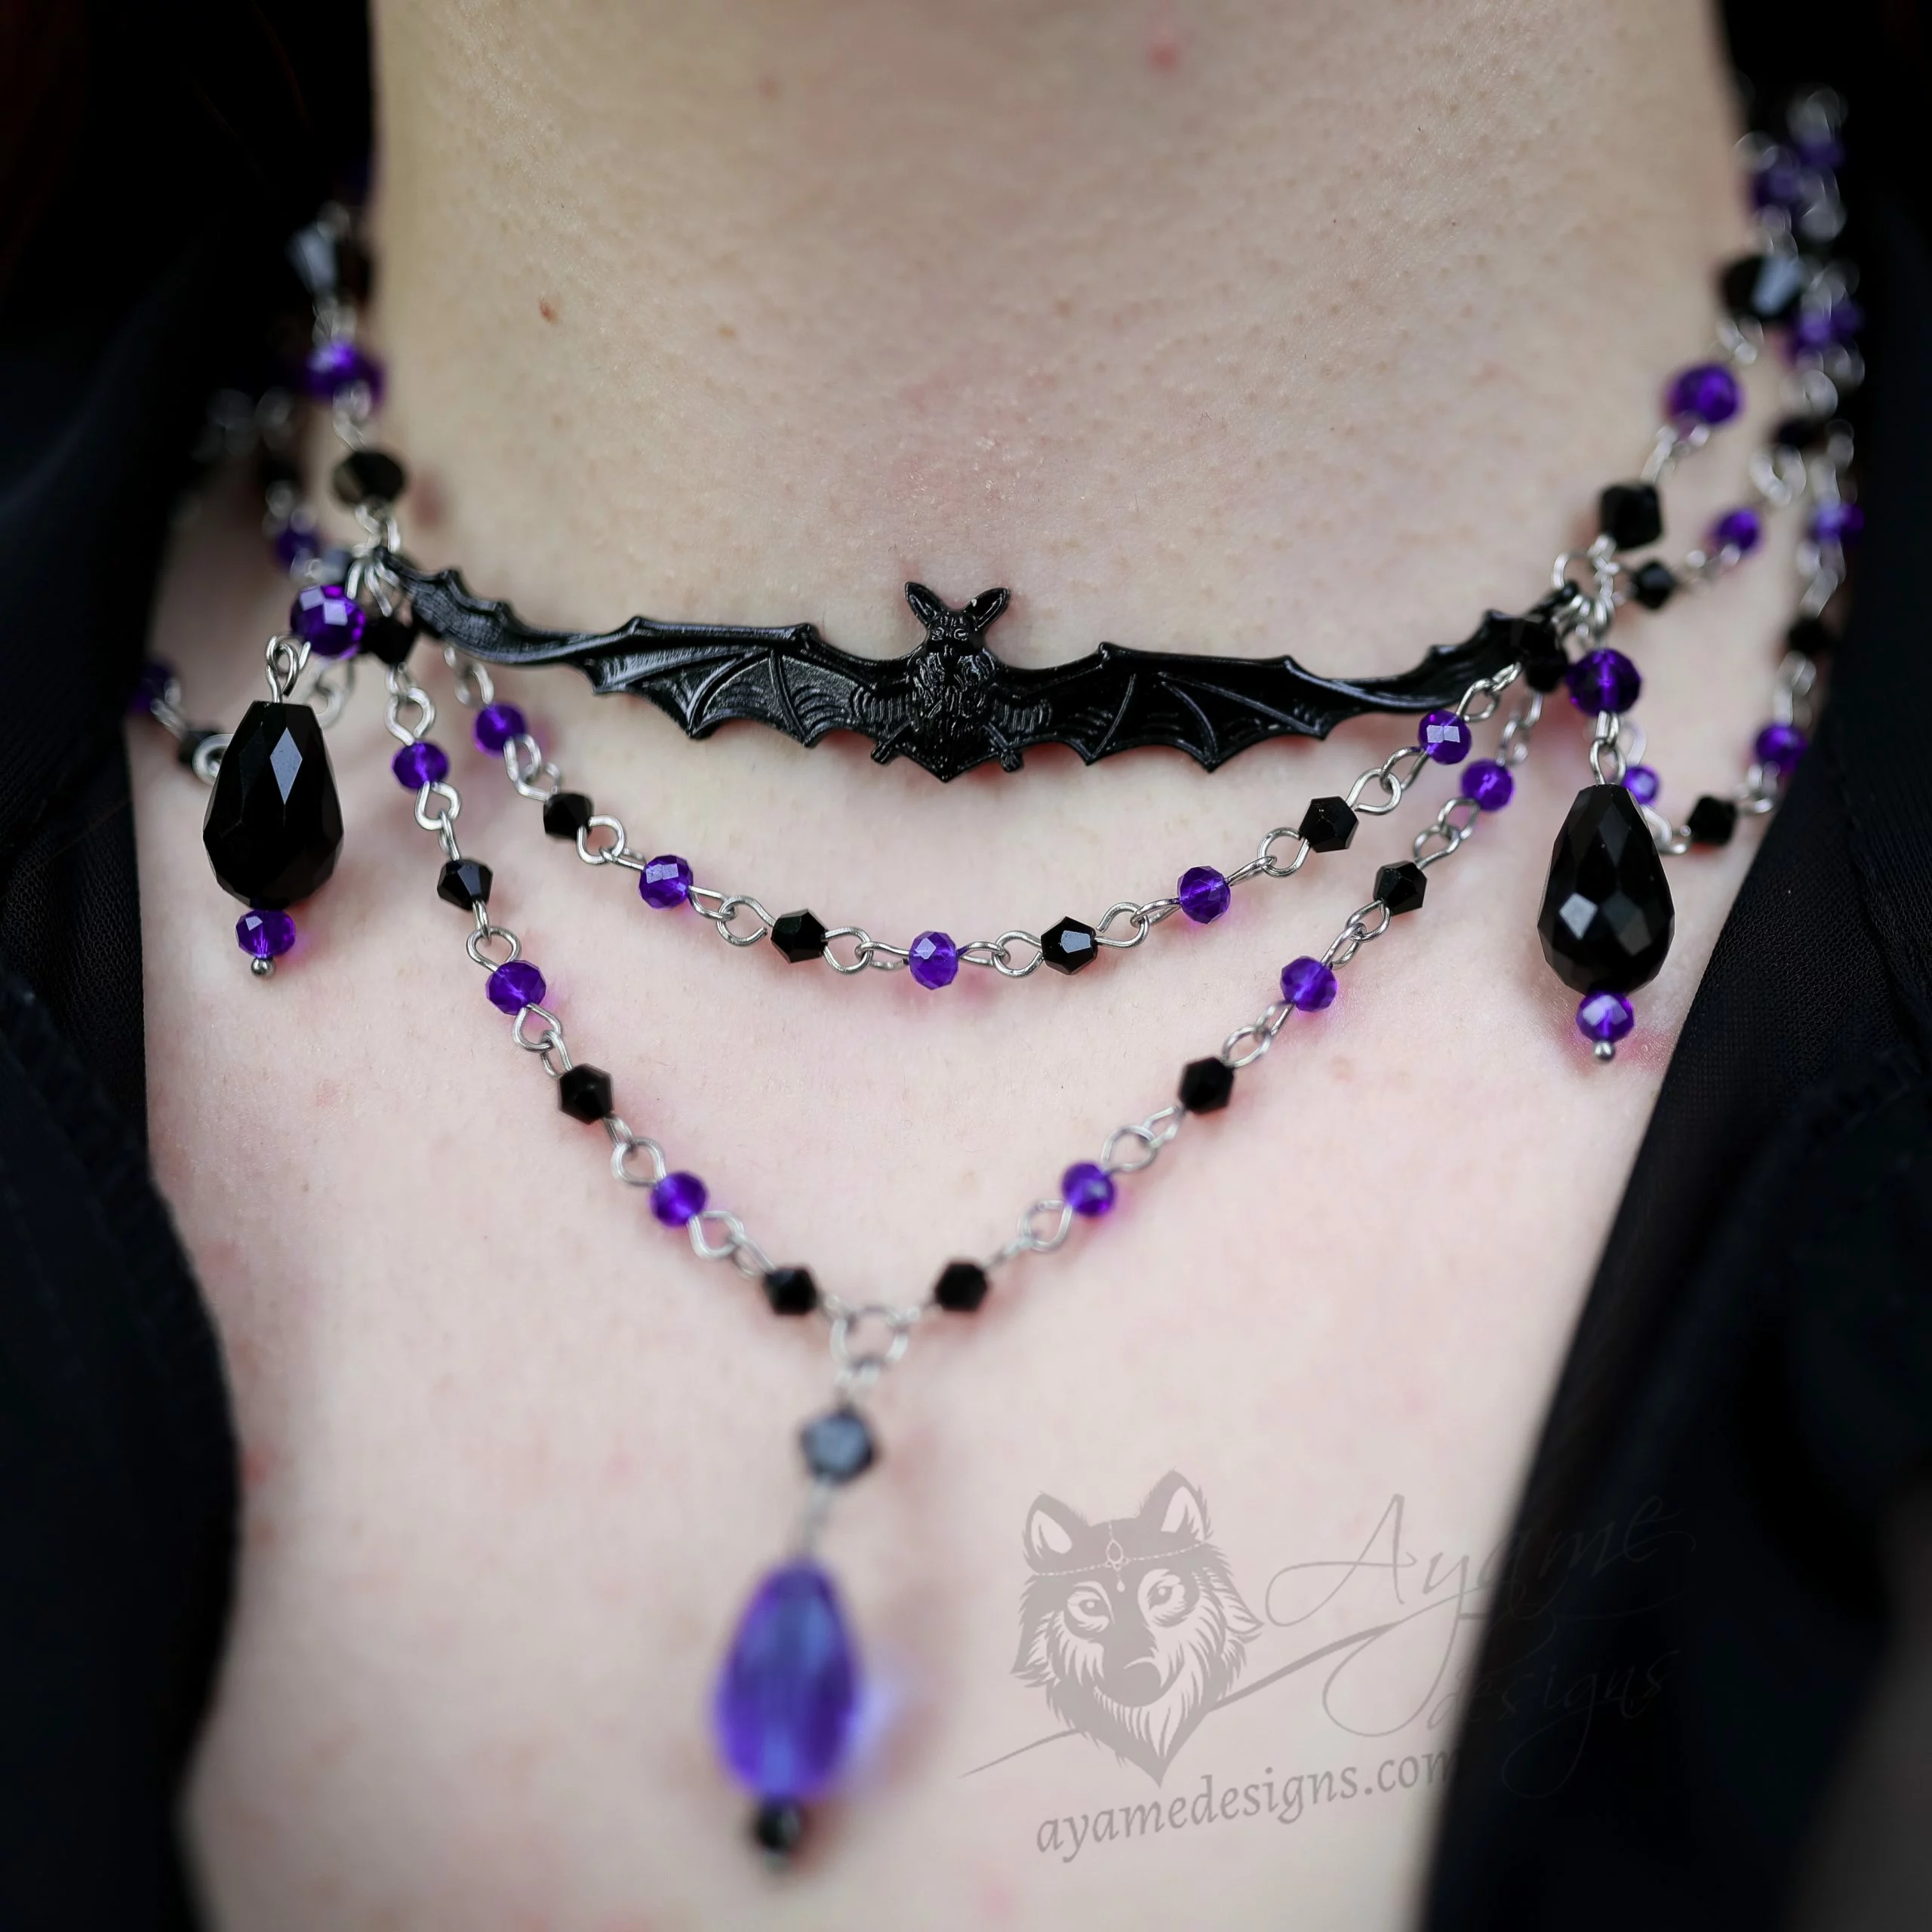 Handmade gothic choker necklace with a bat pendant and blue and black Austrian crystal beads